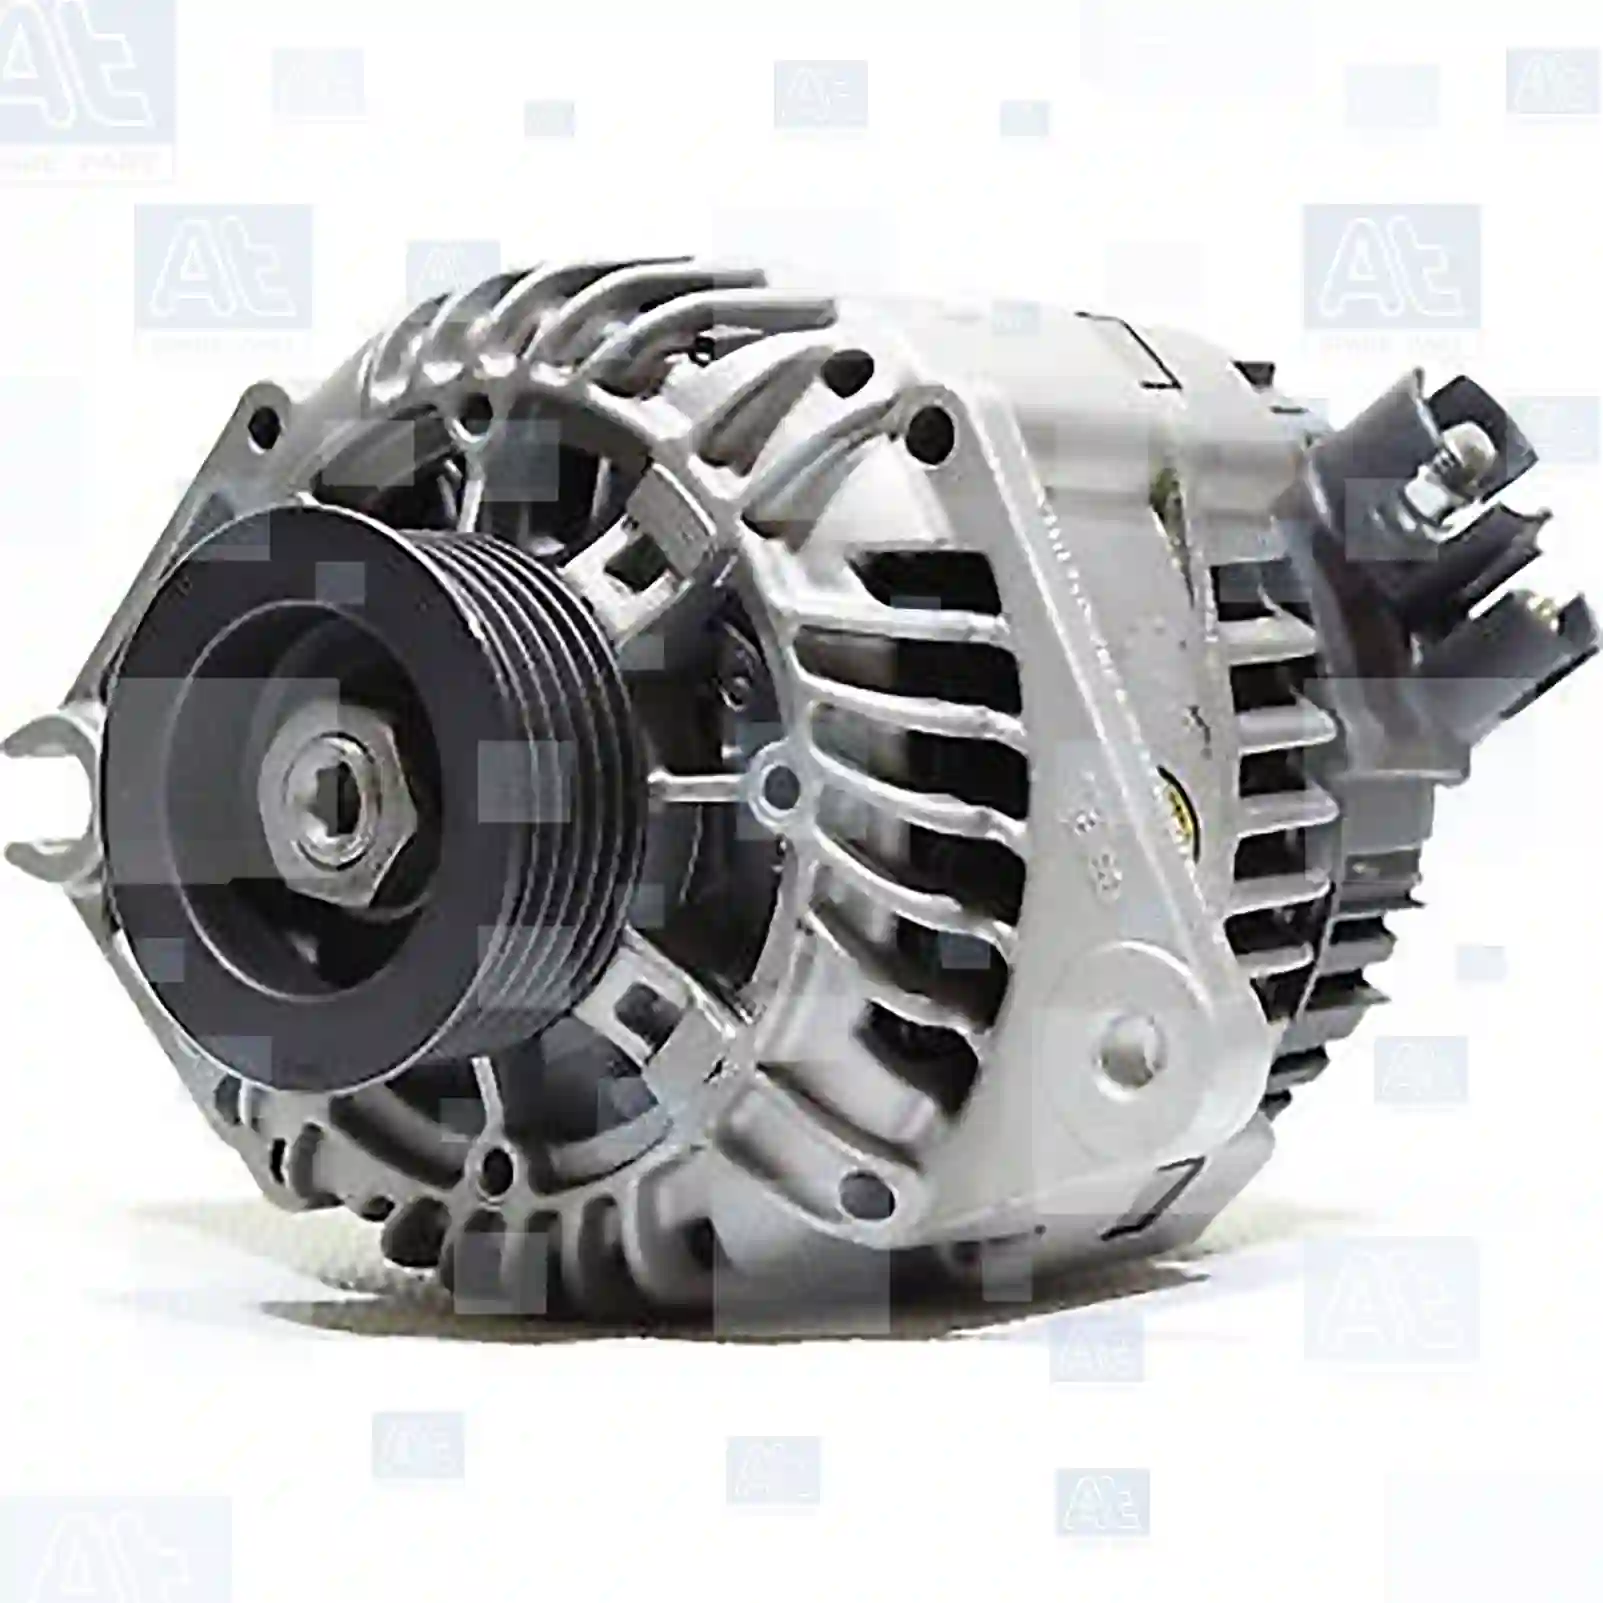 Alternator, 77711543, 5701C3, 5701D9, 57051V, 57052N, 5705E3, 5705E4, 5705E5, 5705F3, 5705F4, 5705F5, 5705F6, 5705F7, 5705G2, 5705G6, 5705G9, 5705H6, 5705H8, 5705H9, 5705HF, 5705HP, 5705HQ, 5705HX, 5705J0, 5705J1, 5705JR, 5705K5, 5705K9, 5705N6, 5705T6, 5705T8, 5705Y1, 5705Y2, 5706F3, 59622N, 9566774580, 9607641280, 9612256180, 9612259680, 9612259880, 9612262680, 9612264280, 9612264380, 9612264680, 9612264880, 9613496680, 1516603, 9612259680, 9612259680, 9612259880, 9612264380, 9612259680, 9612264280, SA434, SA467, SA956, 943356568, 944356567, 944356944, 944356967, 944356976, 5701C3, 5701D9, 57051V, 57052N, 5705E3, 5705E4, 5705E5, 5705F3, 5705F4, 5705F5, 5705F6, 5705F7, 5705G2, 5705G6, 5705G9, 5705H6, 5705H8, 5705H9, 5705HF, 5705HP, 5705HQ, 5705HX, 5705J0, 5705J1, 5705JR, 5705K5, 5705K9, 5705N6, 5705T6, 5705T8, 5705Y1, 5705Y2, 5706F3, 59622N, 9566774580, 9607641280, 9612256180, 9612259680, 9612259880, 9612262680, 9612264280, 9612264380, 9612264680, 9612264880, 9613496680 ||  77711543 At Spare Part | Engine, Accelerator Pedal, Camshaft, Connecting Rod, Crankcase, Crankshaft, Cylinder Head, Engine Suspension Mountings, Exhaust Manifold, Exhaust Gas Recirculation, Filter Kits, Flywheel Housing, General Overhaul Kits, Engine, Intake Manifold, Oil Cleaner, Oil Cooler, Oil Filter, Oil Pump, Oil Sump, Piston & Liner, Sensor & Switch, Timing Case, Turbocharger, Cooling System, Belt Tensioner, Coolant Filter, Coolant Pipe, Corrosion Prevention Agent, Drive, Expansion Tank, Fan, Intercooler, Monitors & Gauges, Radiator, Thermostat, V-Belt / Timing belt, Water Pump, Fuel System, Electronical Injector Unit, Feed Pump, Fuel Filter, cpl., Fuel Gauge Sender,  Fuel Line, Fuel Pump, Fuel Tank, Injection Line Kit, Injection Pump, Exhaust System, Clutch & Pedal, Gearbox, Propeller Shaft, Axles, Brake System, Hubs & Wheels, Suspension, Leaf Spring, Universal Parts / Accessories, Steering, Electrical System, Cabin Alternator, 77711543, 5701C3, 5701D9, 57051V, 57052N, 5705E3, 5705E4, 5705E5, 5705F3, 5705F4, 5705F5, 5705F6, 5705F7, 5705G2, 5705G6, 5705G9, 5705H6, 5705H8, 5705H9, 5705HF, 5705HP, 5705HQ, 5705HX, 5705J0, 5705J1, 5705JR, 5705K5, 5705K9, 5705N6, 5705T6, 5705T8, 5705Y1, 5705Y2, 5706F3, 59622N, 9566774580, 9607641280, 9612256180, 9612259680, 9612259880, 9612262680, 9612264280, 9612264380, 9612264680, 9612264880, 9613496680, 1516603, 9612259680, 9612259680, 9612259880, 9612264380, 9612259680, 9612264280, SA434, SA467, SA956, 943356568, 944356567, 944356944, 944356967, 944356976, 5701C3, 5701D9, 57051V, 57052N, 5705E3, 5705E4, 5705E5, 5705F3, 5705F4, 5705F5, 5705F6, 5705F7, 5705G2, 5705G6, 5705G9, 5705H6, 5705H8, 5705H9, 5705HF, 5705HP, 5705HQ, 5705HX, 5705J0, 5705J1, 5705JR, 5705K5, 5705K9, 5705N6, 5705T6, 5705T8, 5705Y1, 5705Y2, 5706F3, 59622N, 9566774580, 9607641280, 9612256180, 9612259680, 9612259880, 9612262680, 9612264280, 9612264380, 9612264680, 9612264880, 9613496680 ||  77711543 At Spare Part | Engine, Accelerator Pedal, Camshaft, Connecting Rod, Crankcase, Crankshaft, Cylinder Head, Engine Suspension Mountings, Exhaust Manifold, Exhaust Gas Recirculation, Filter Kits, Flywheel Housing, General Overhaul Kits, Engine, Intake Manifold, Oil Cleaner, Oil Cooler, Oil Filter, Oil Pump, Oil Sump, Piston & Liner, Sensor & Switch, Timing Case, Turbocharger, Cooling System, Belt Tensioner, Coolant Filter, Coolant Pipe, Corrosion Prevention Agent, Drive, Expansion Tank, Fan, Intercooler, Monitors & Gauges, Radiator, Thermostat, V-Belt / Timing belt, Water Pump, Fuel System, Electronical Injector Unit, Feed Pump, Fuel Filter, cpl., Fuel Gauge Sender,  Fuel Line, Fuel Pump, Fuel Tank, Injection Line Kit, Injection Pump, Exhaust System, Clutch & Pedal, Gearbox, Propeller Shaft, Axles, Brake System, Hubs & Wheels, Suspension, Leaf Spring, Universal Parts / Accessories, Steering, Electrical System, Cabin